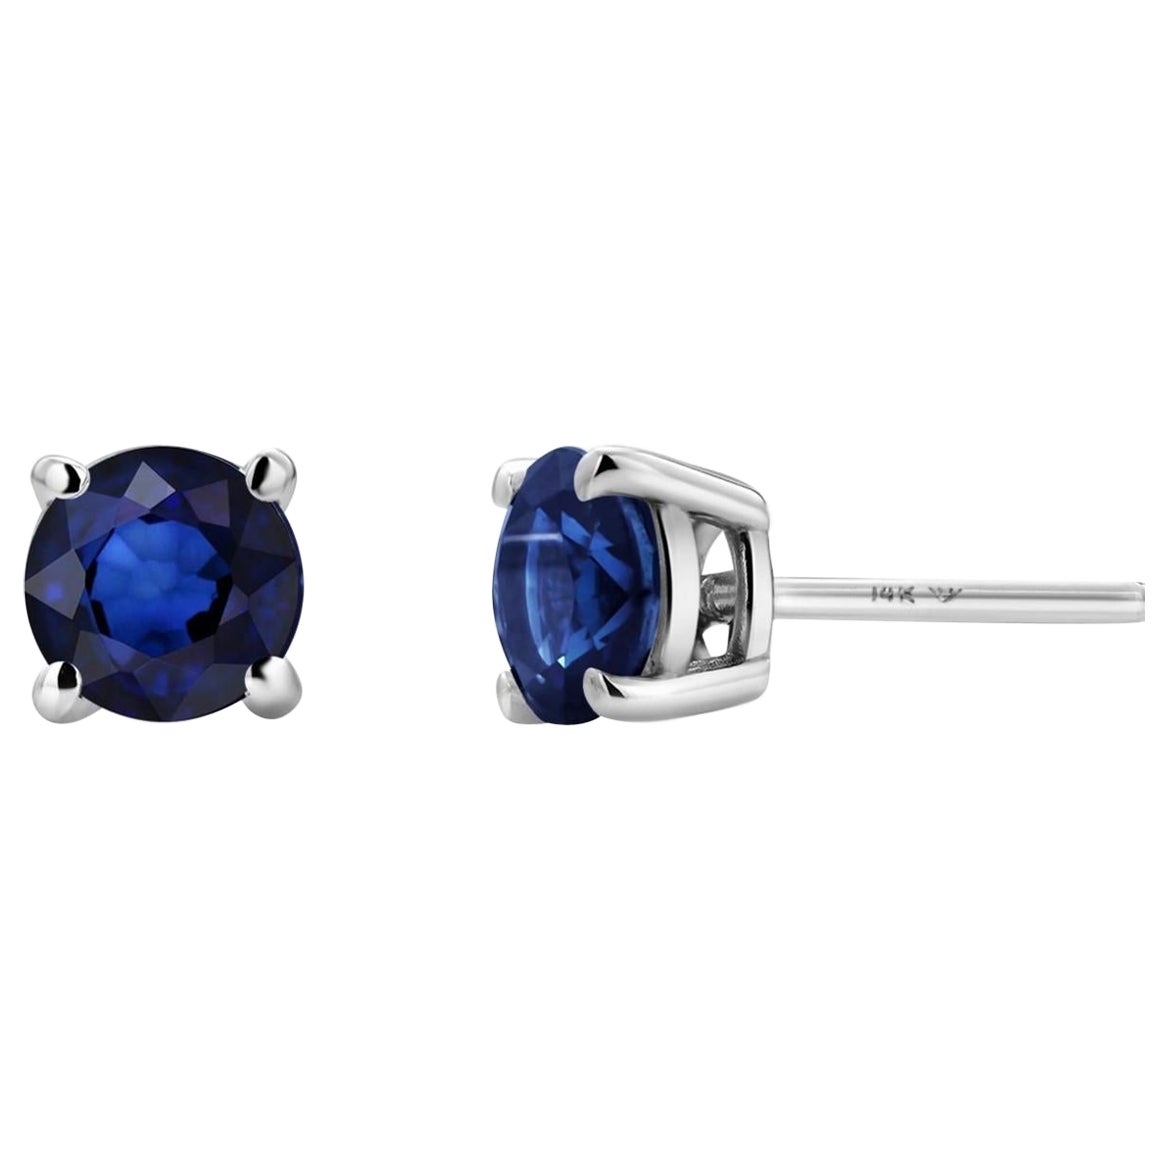 Matched Pair Round Sapphire 1.65 Carat White Gold 0.23 Inch Wide Stud Earrings 